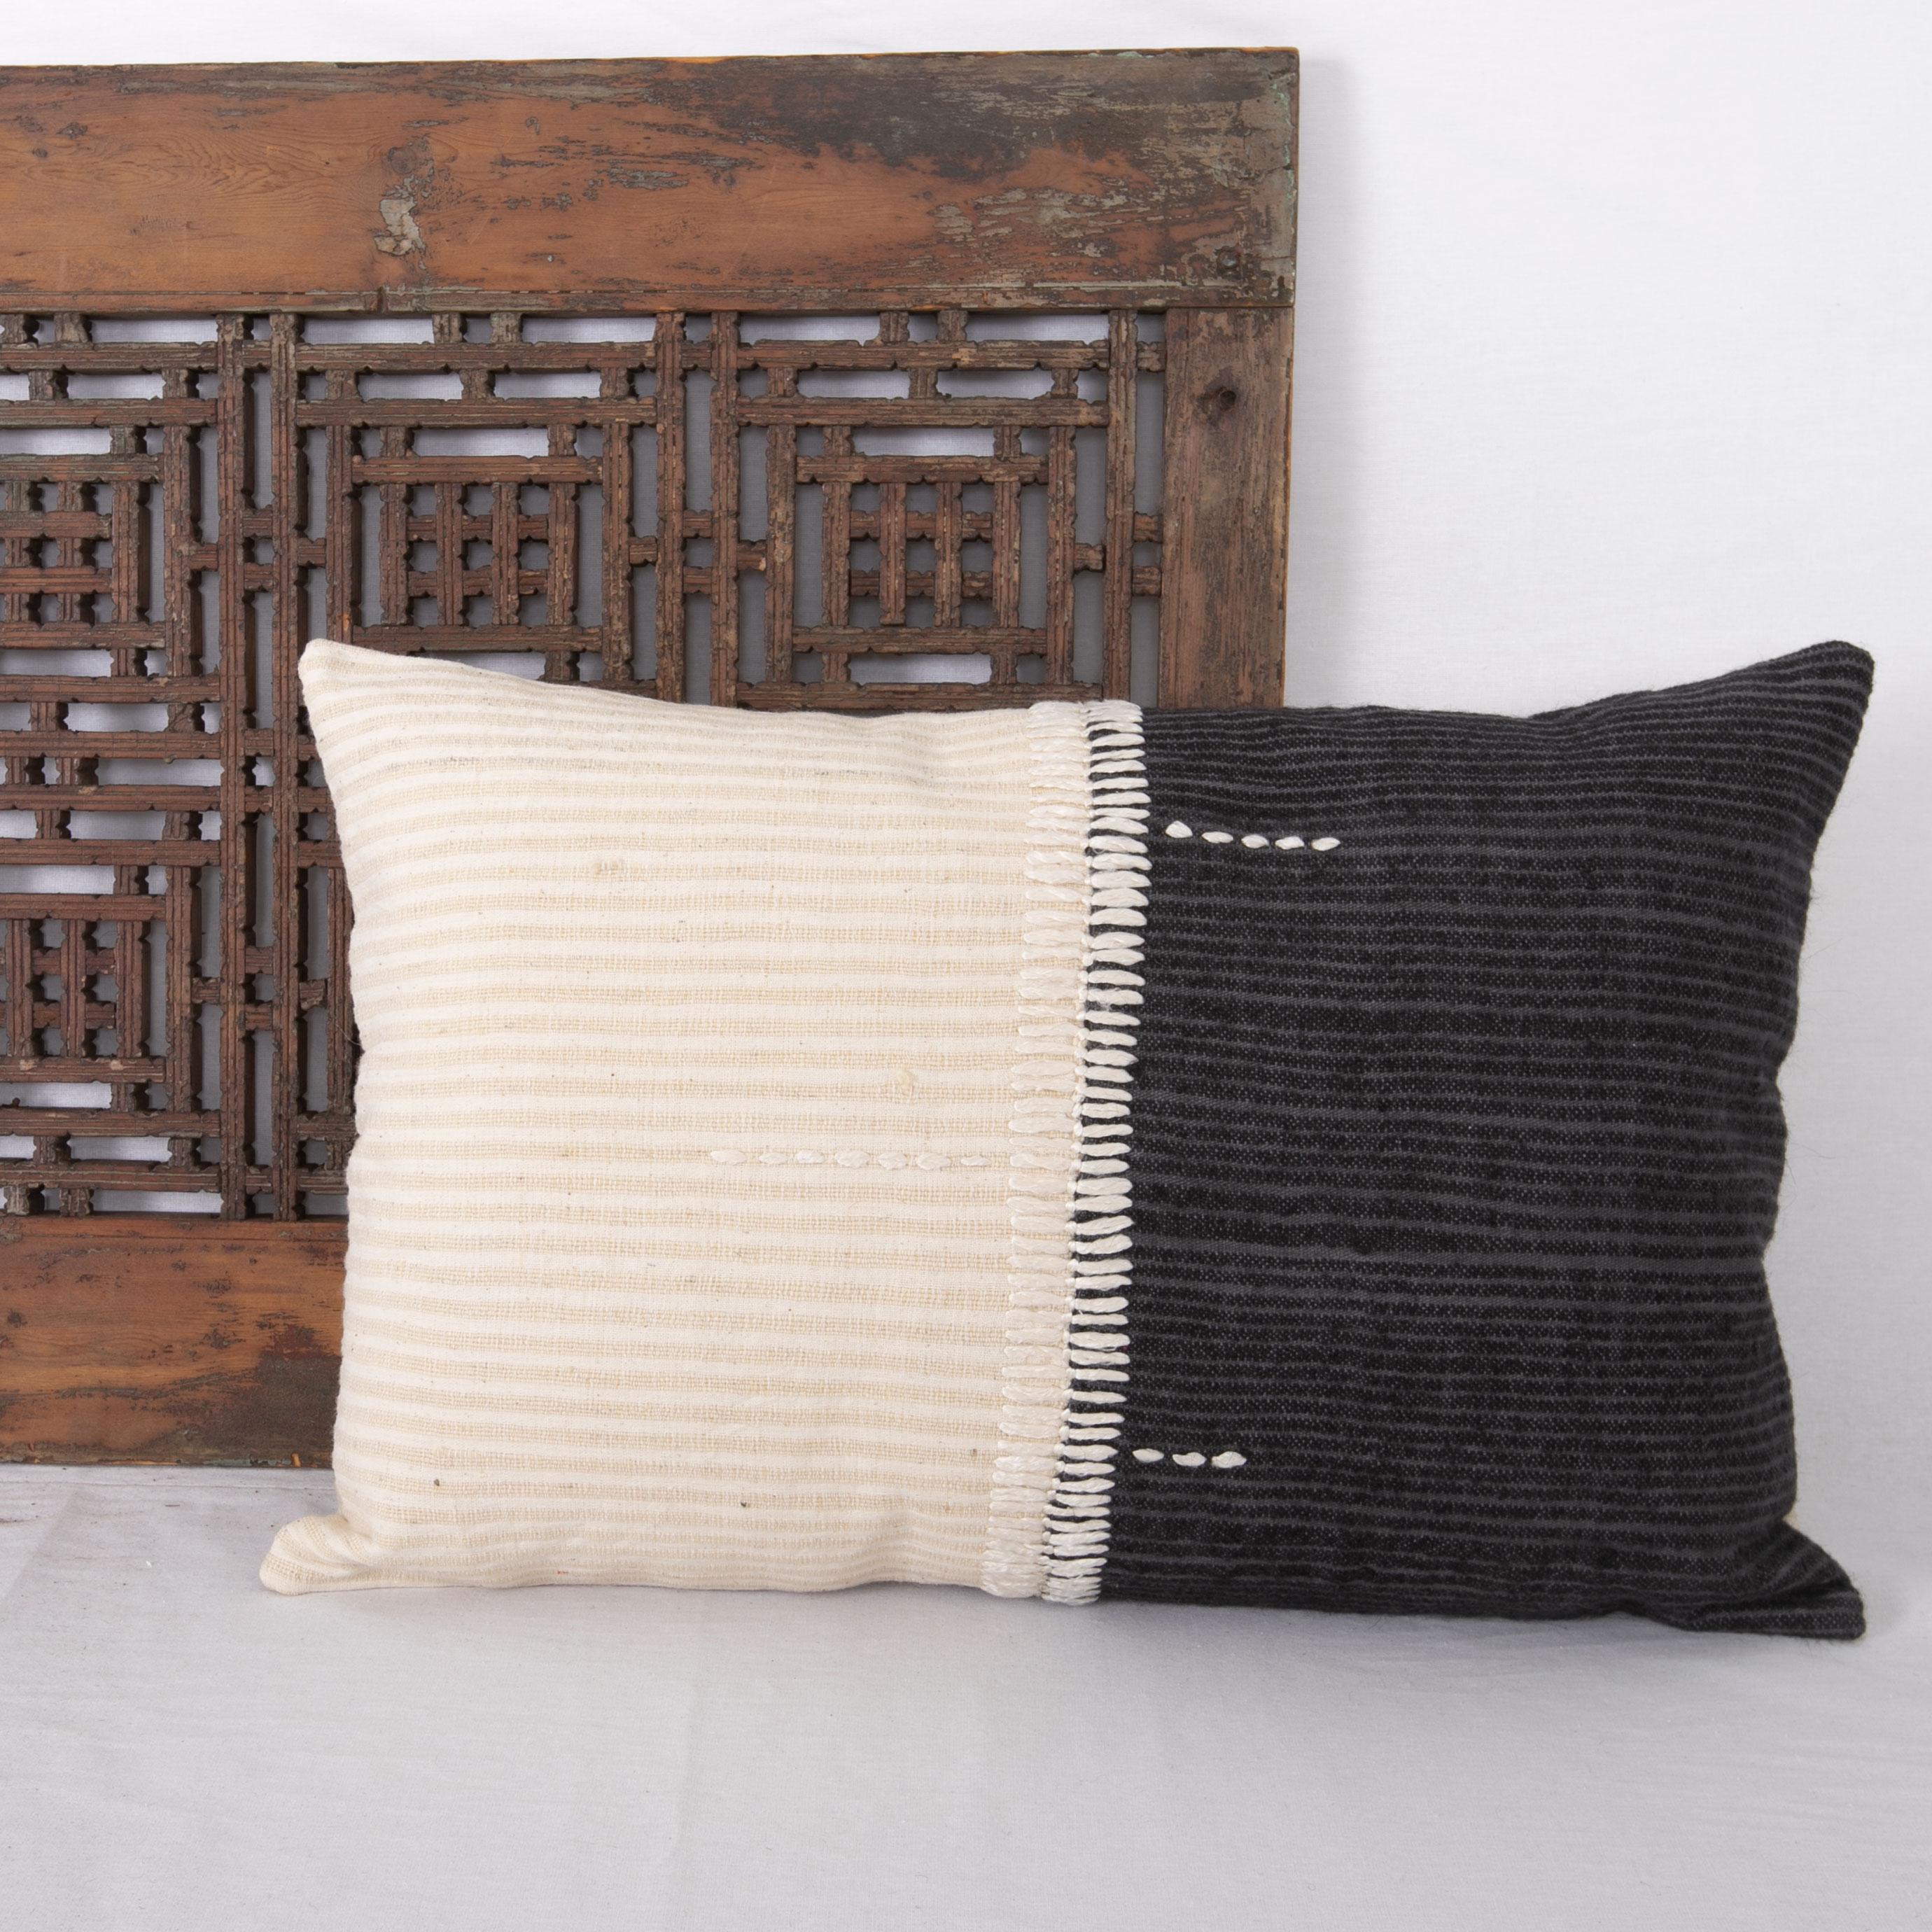 Wool Pillow Case Made from Anatolian Vintage Textiles